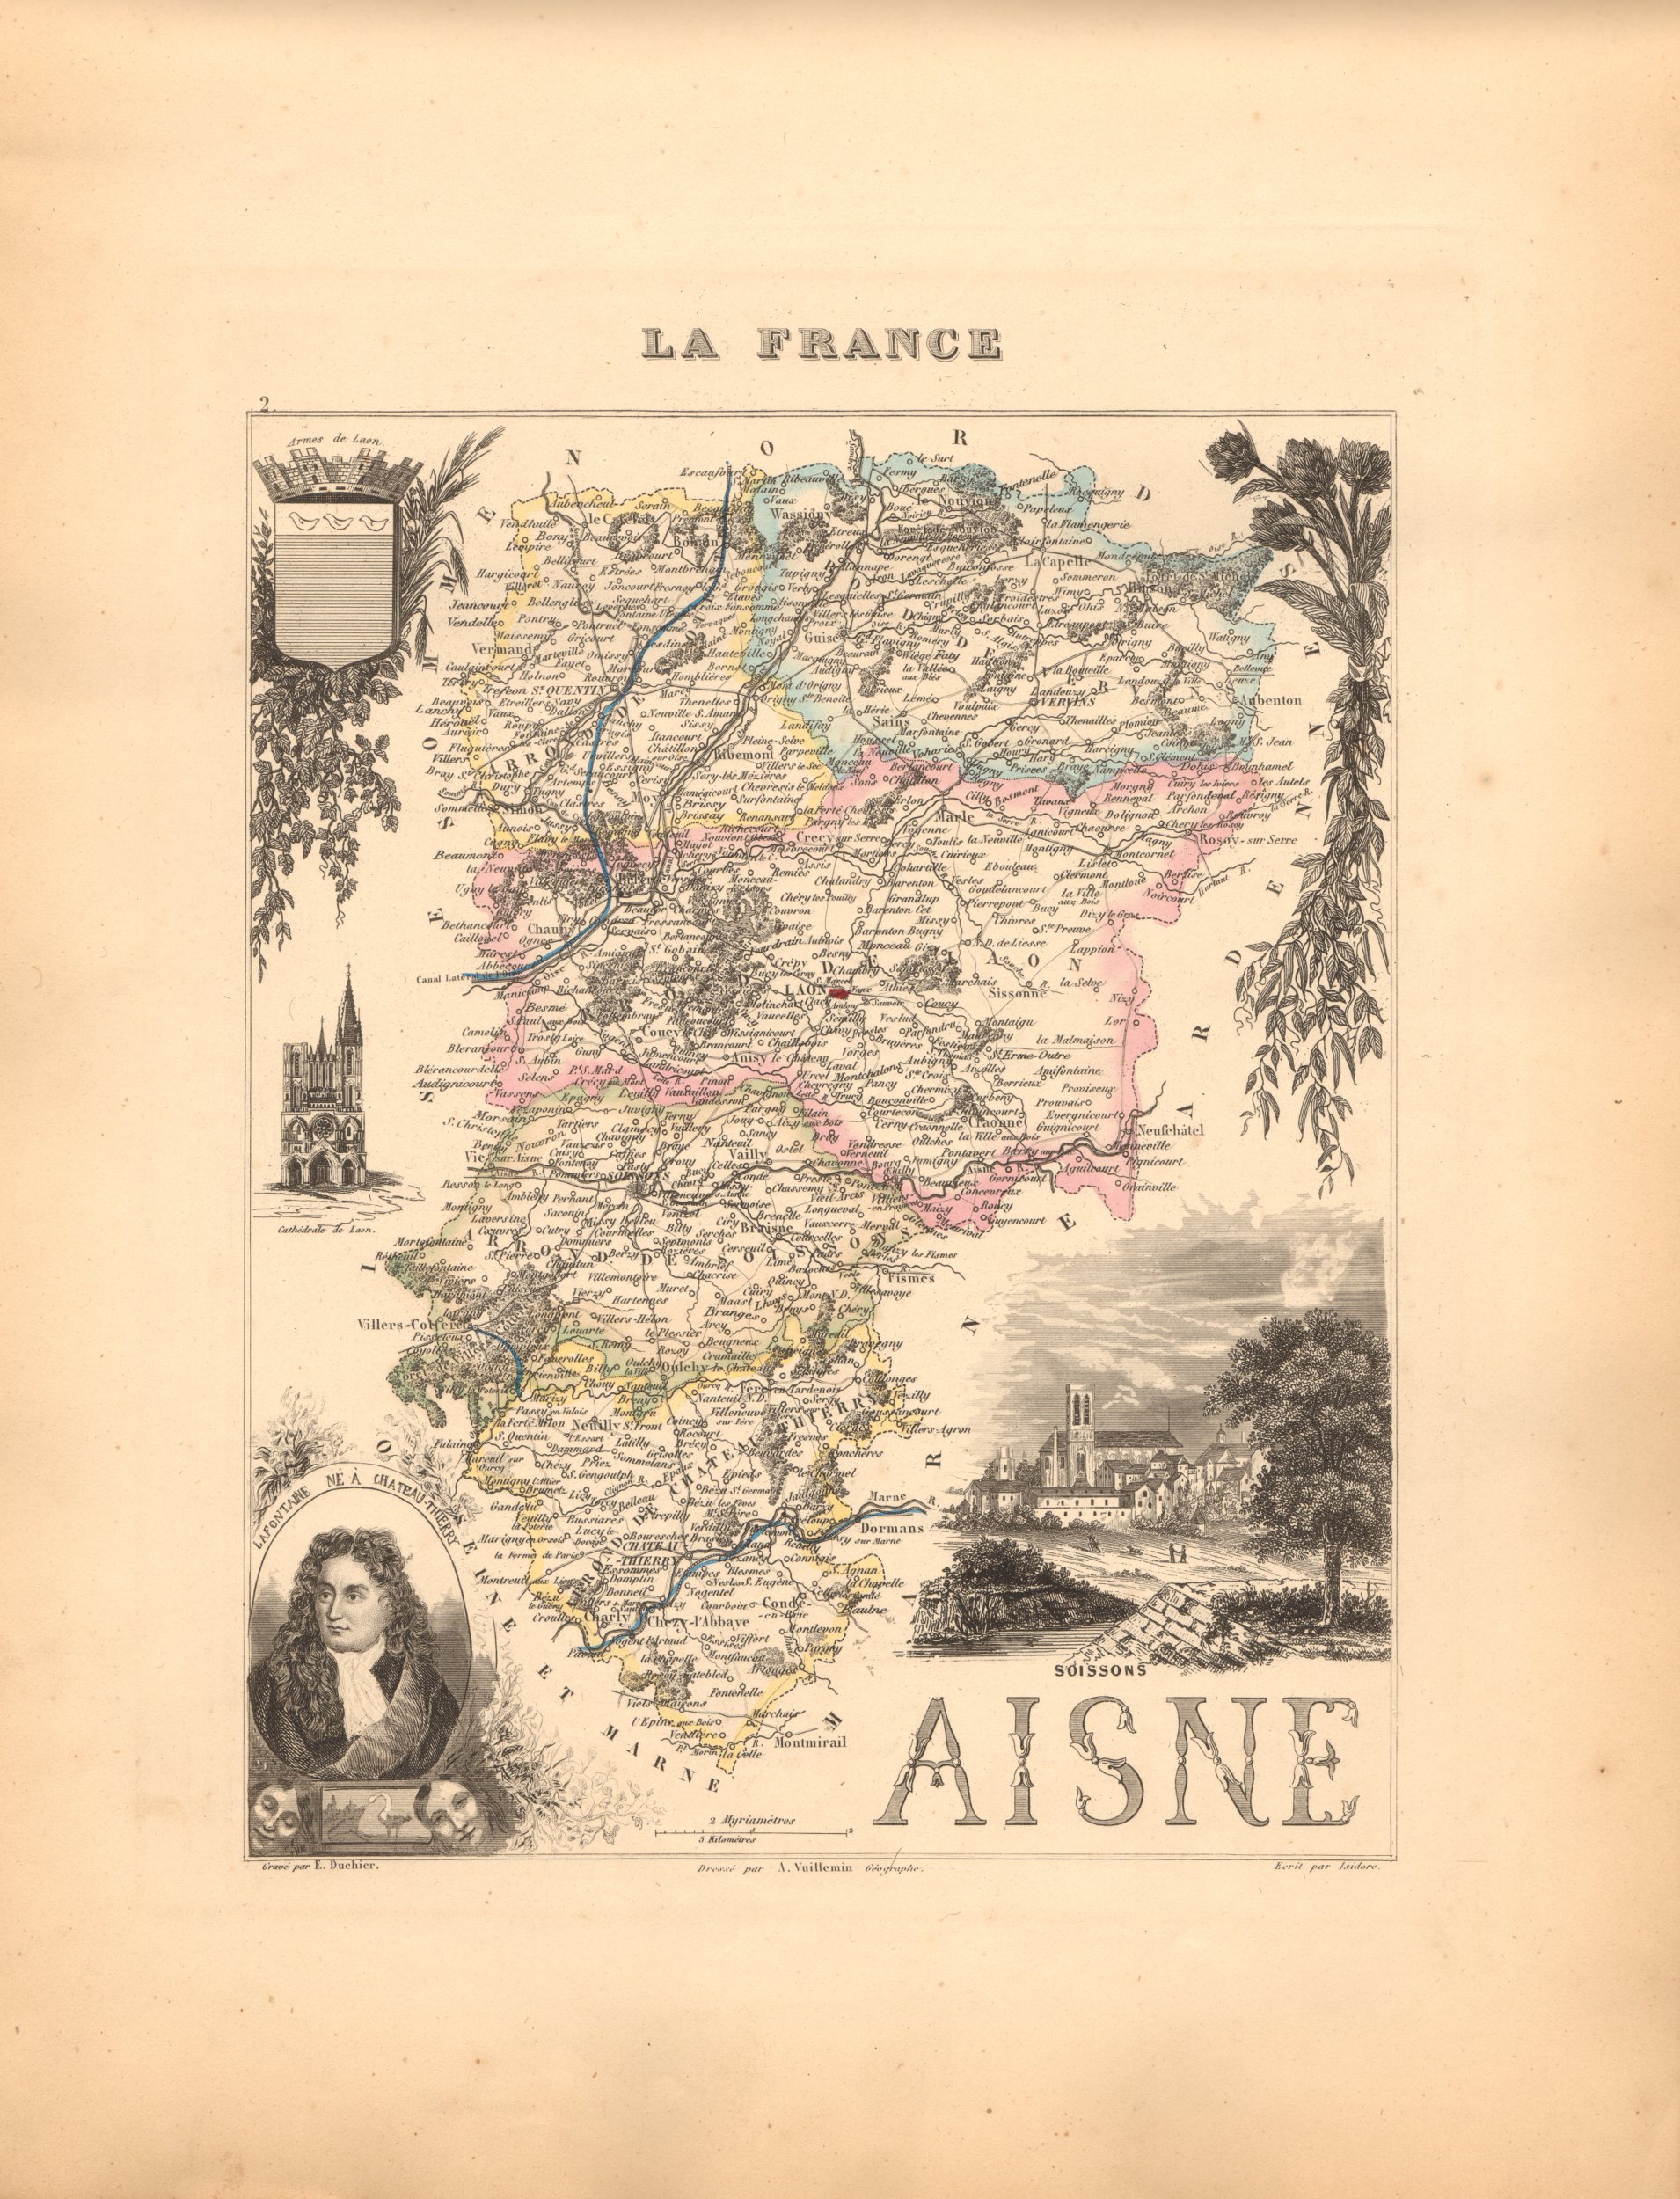 Aisne - French Department Map